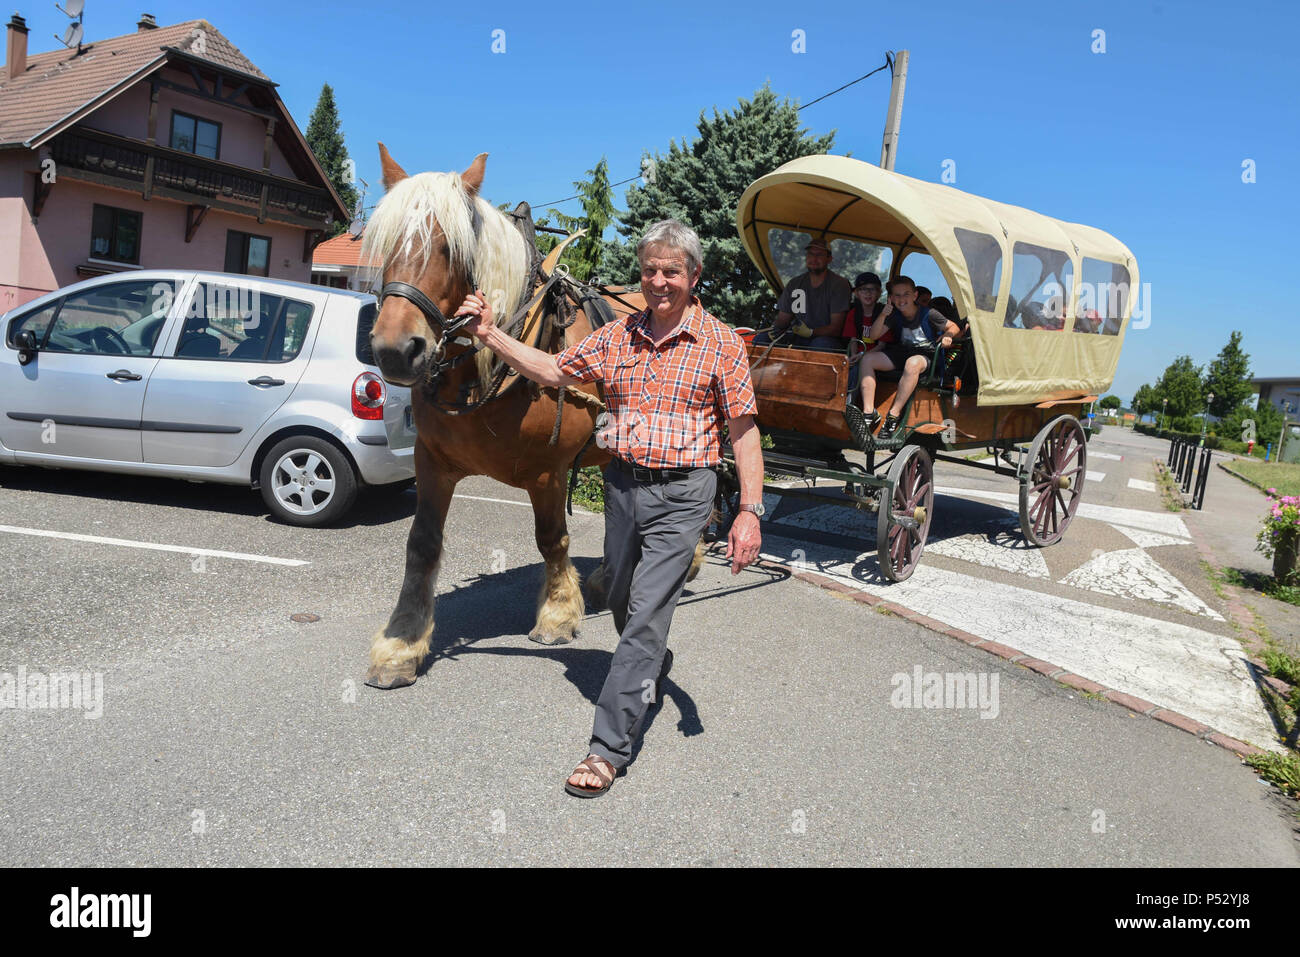 June 30, 2015 - Ungersheim, France: Jean-Claude Mensch, the mayor of  Ungersheim, poses with the municipal horse, "Richelieu", which is used to  transport children to their school. The small Alsacian village of